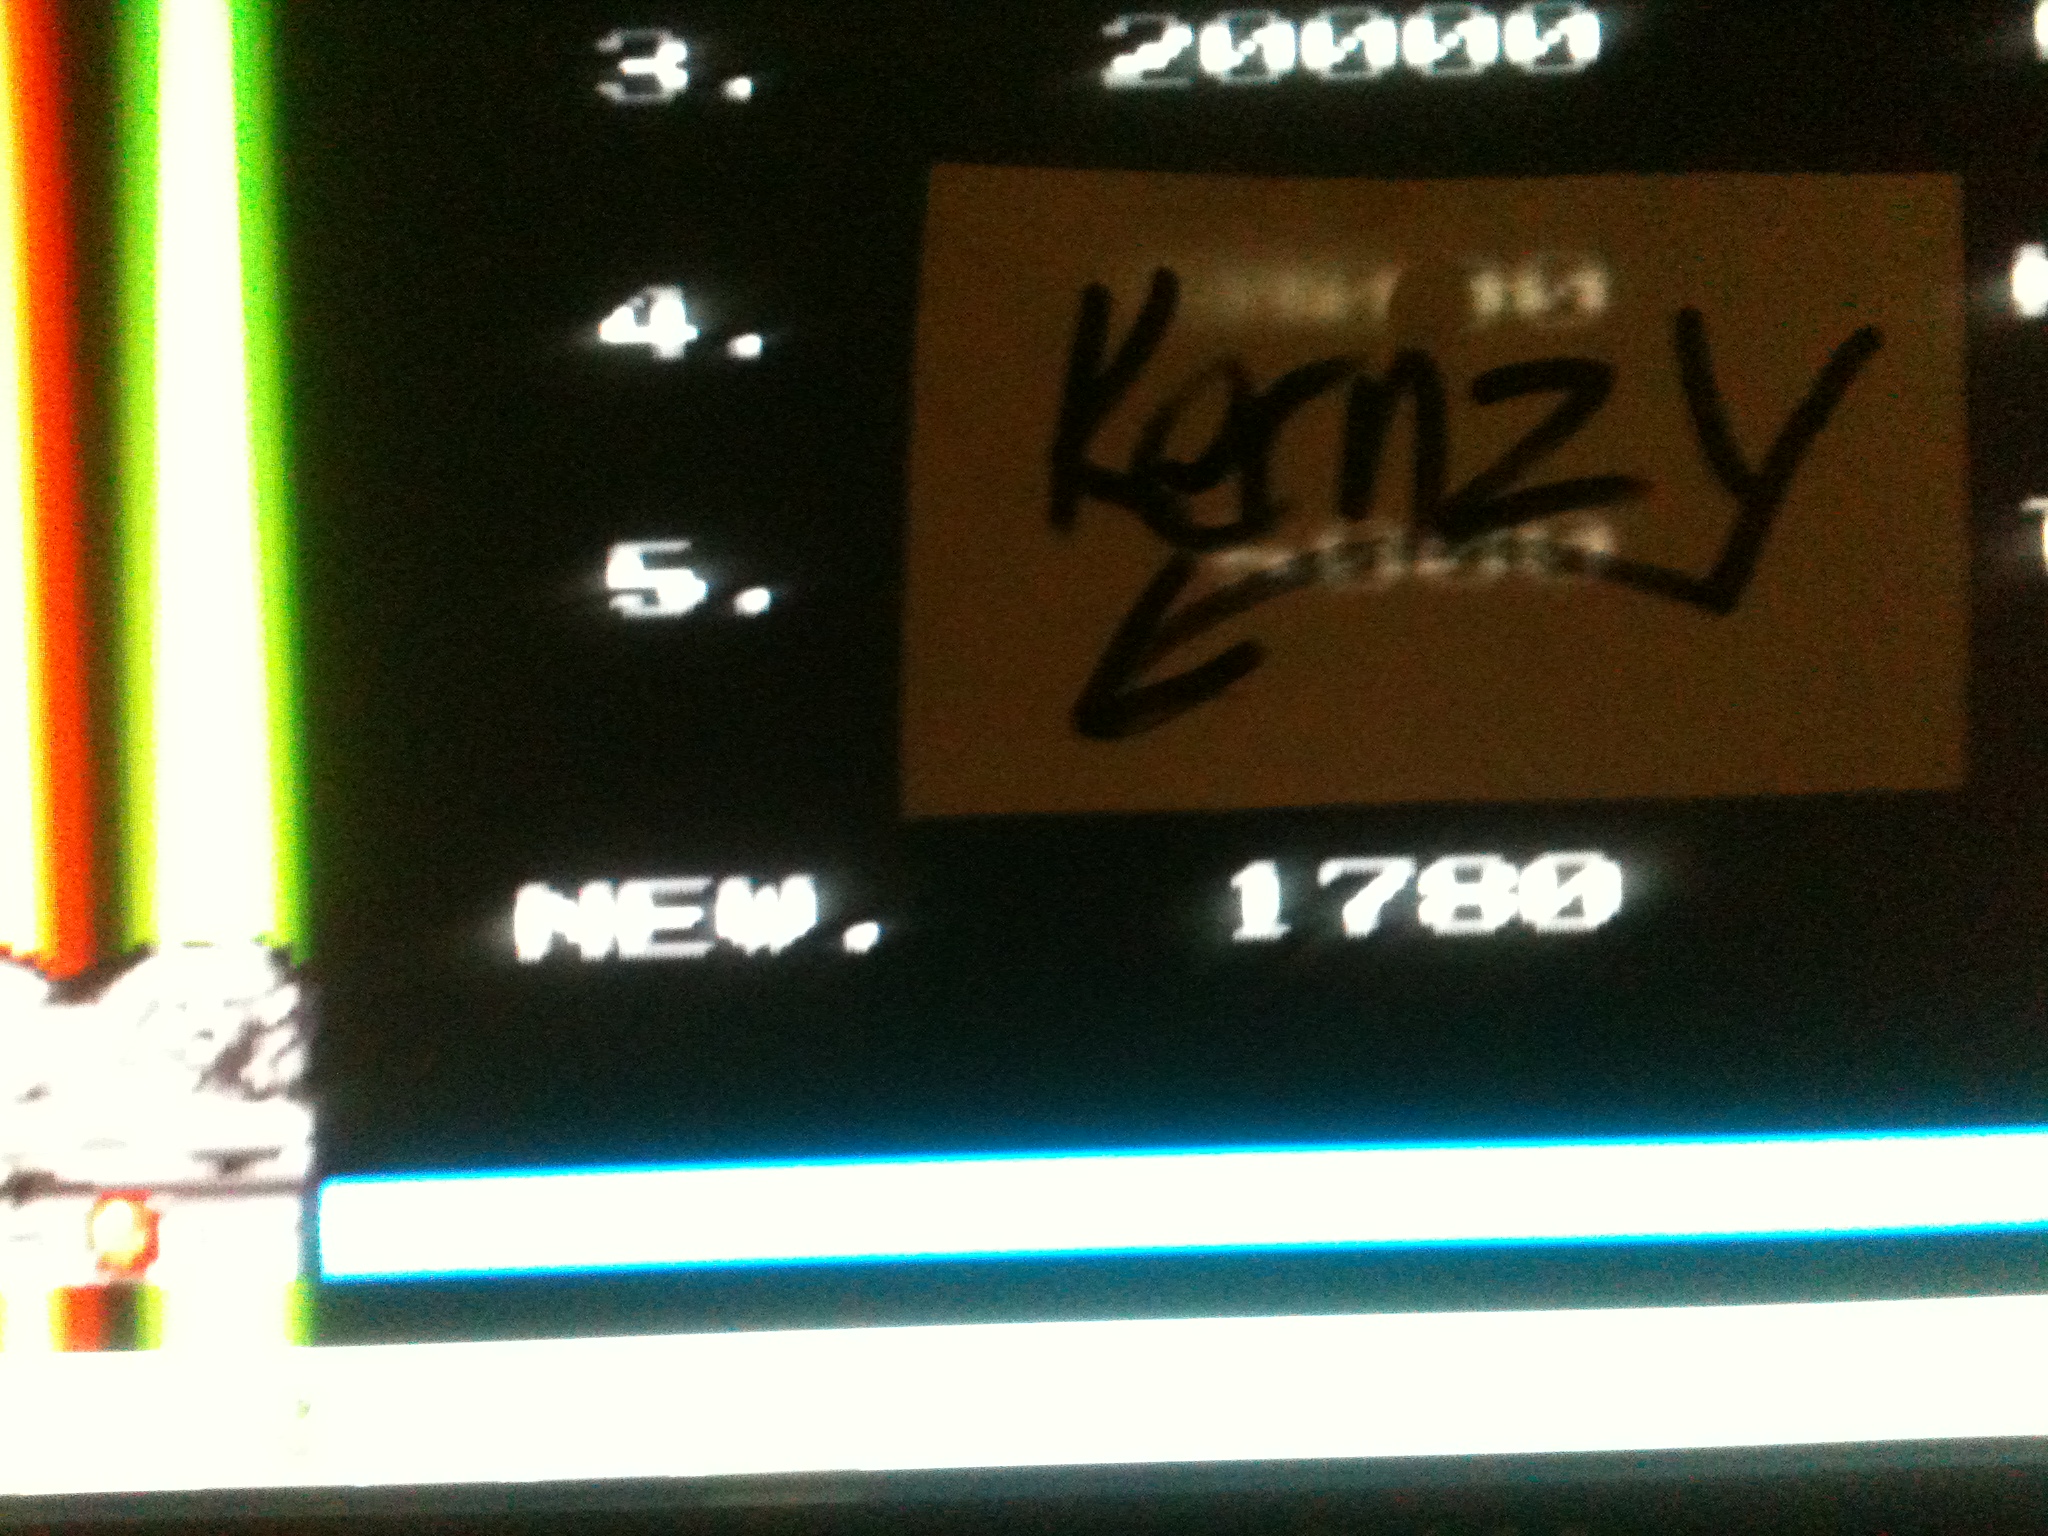 kernzy: Drop Off (TurboGrafx-16/PC Engine Emulated) 1,780 points on 2014-11-25 06:33:46